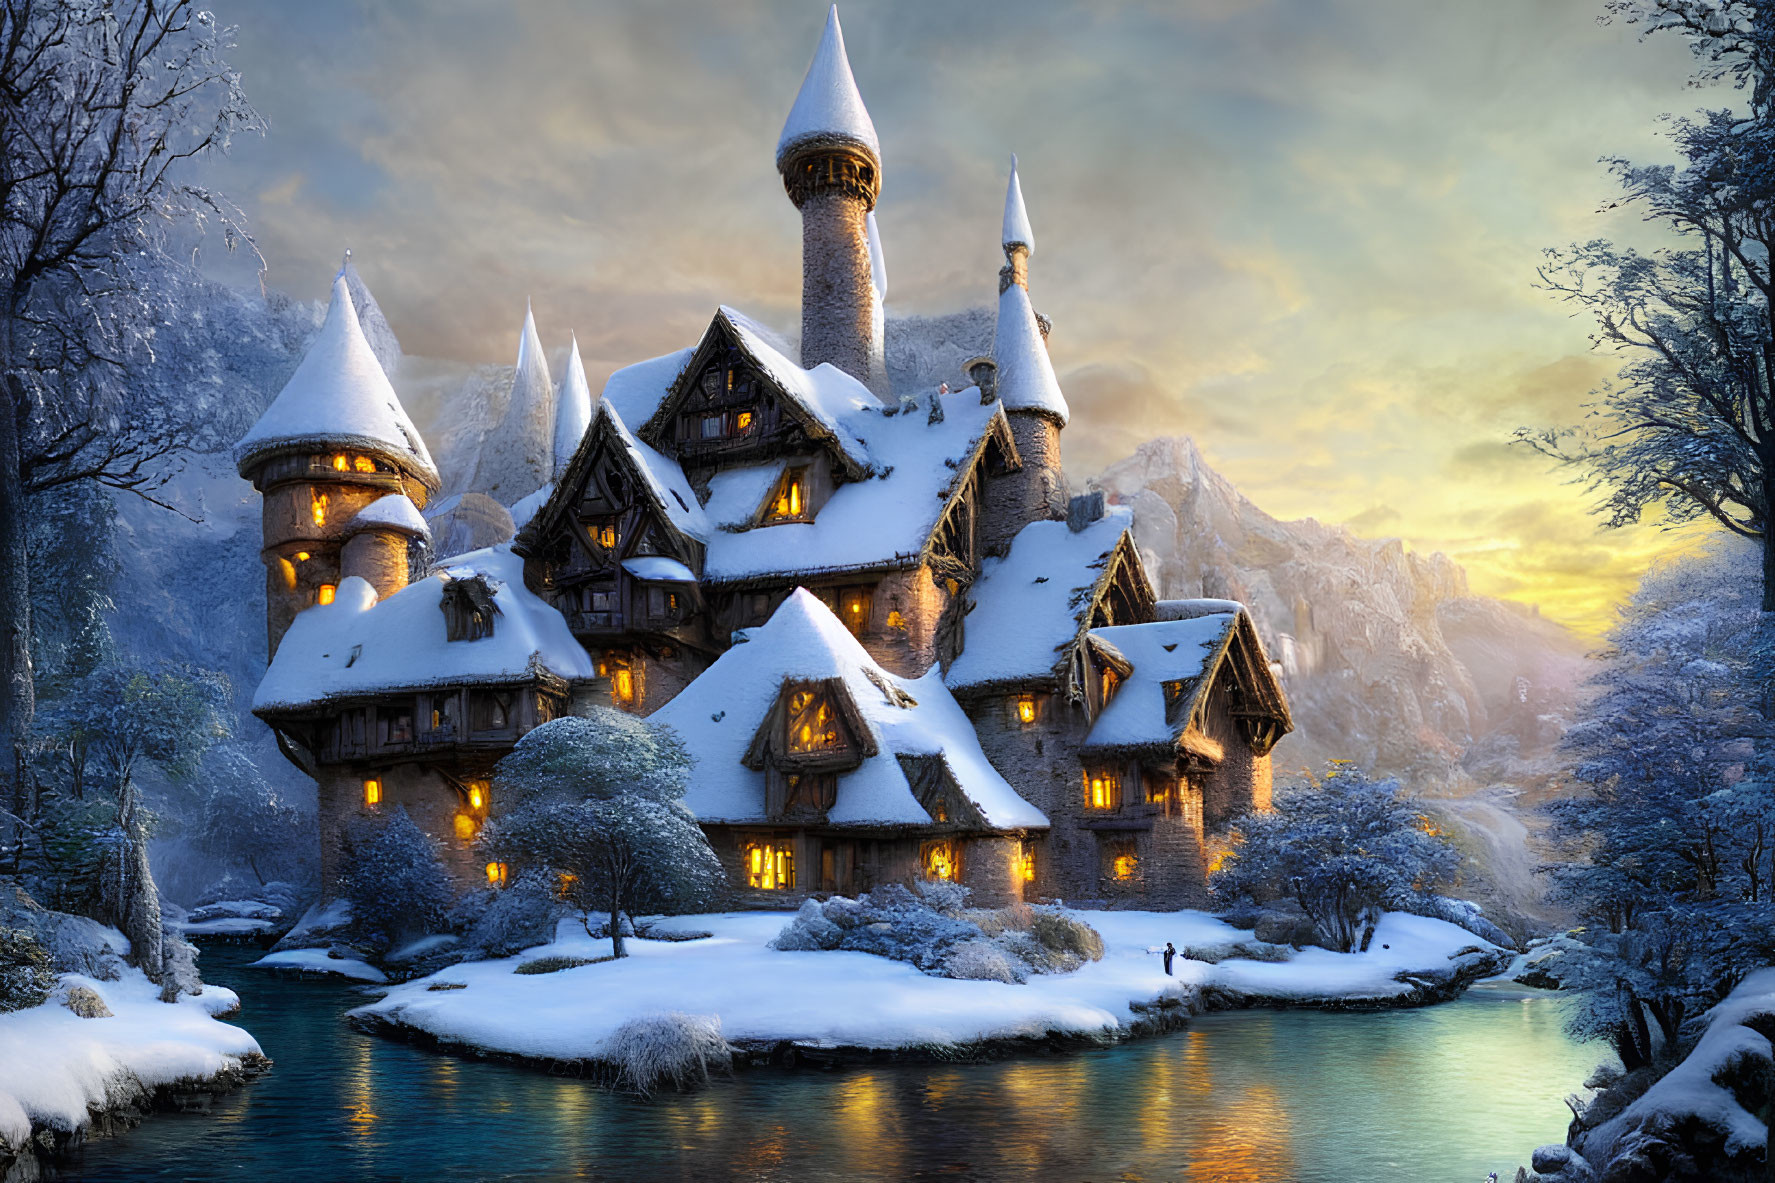 Snowy castle with lit windows by tranquil river at twilight